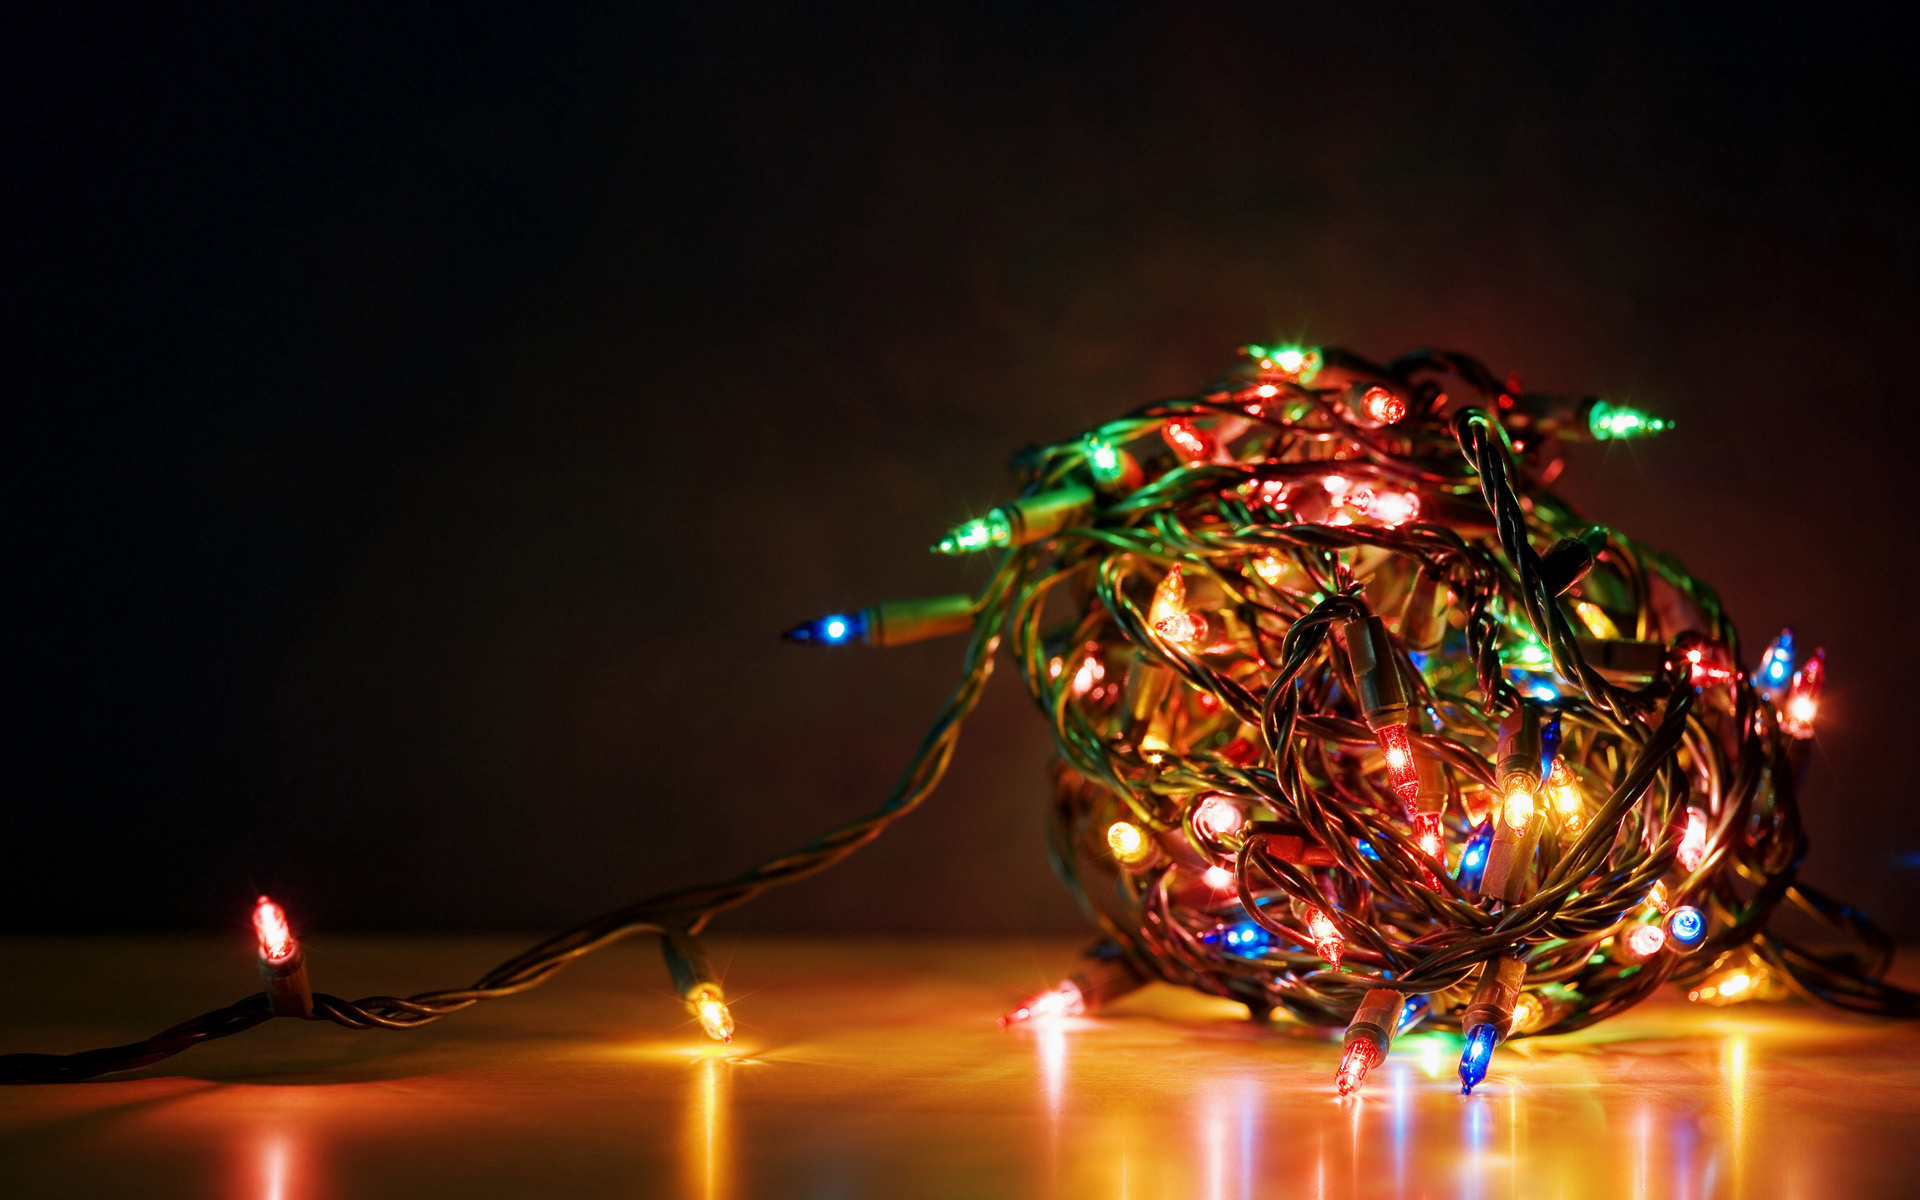 260+ Christmas Lights HD Wallpapers and Backgrounds